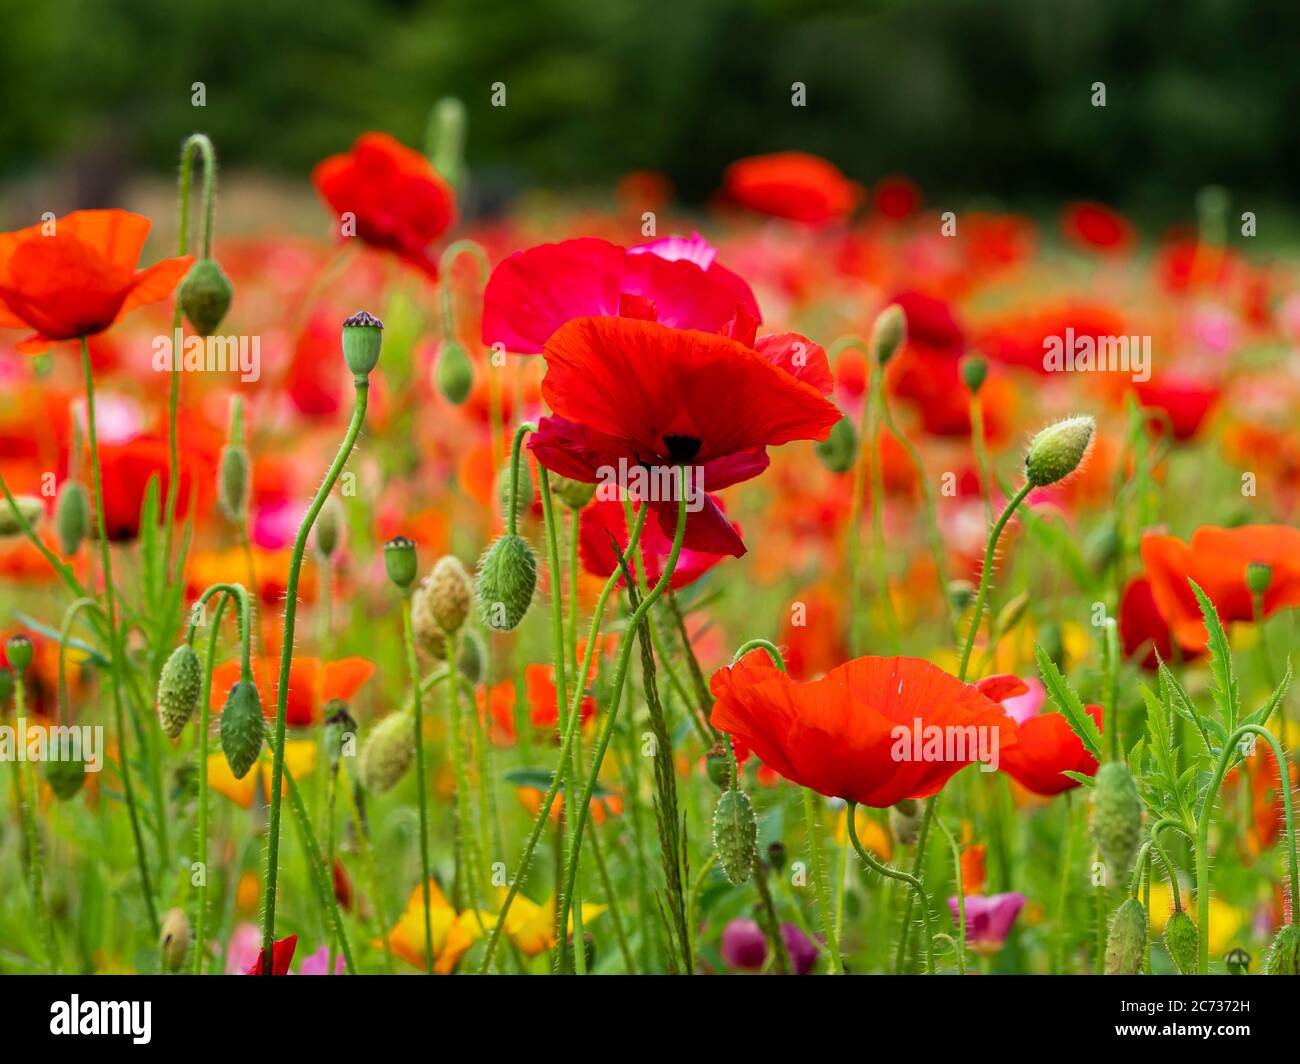 Red and yellow poppy flowers, buds and seed pods in a summer garden Stock Photo